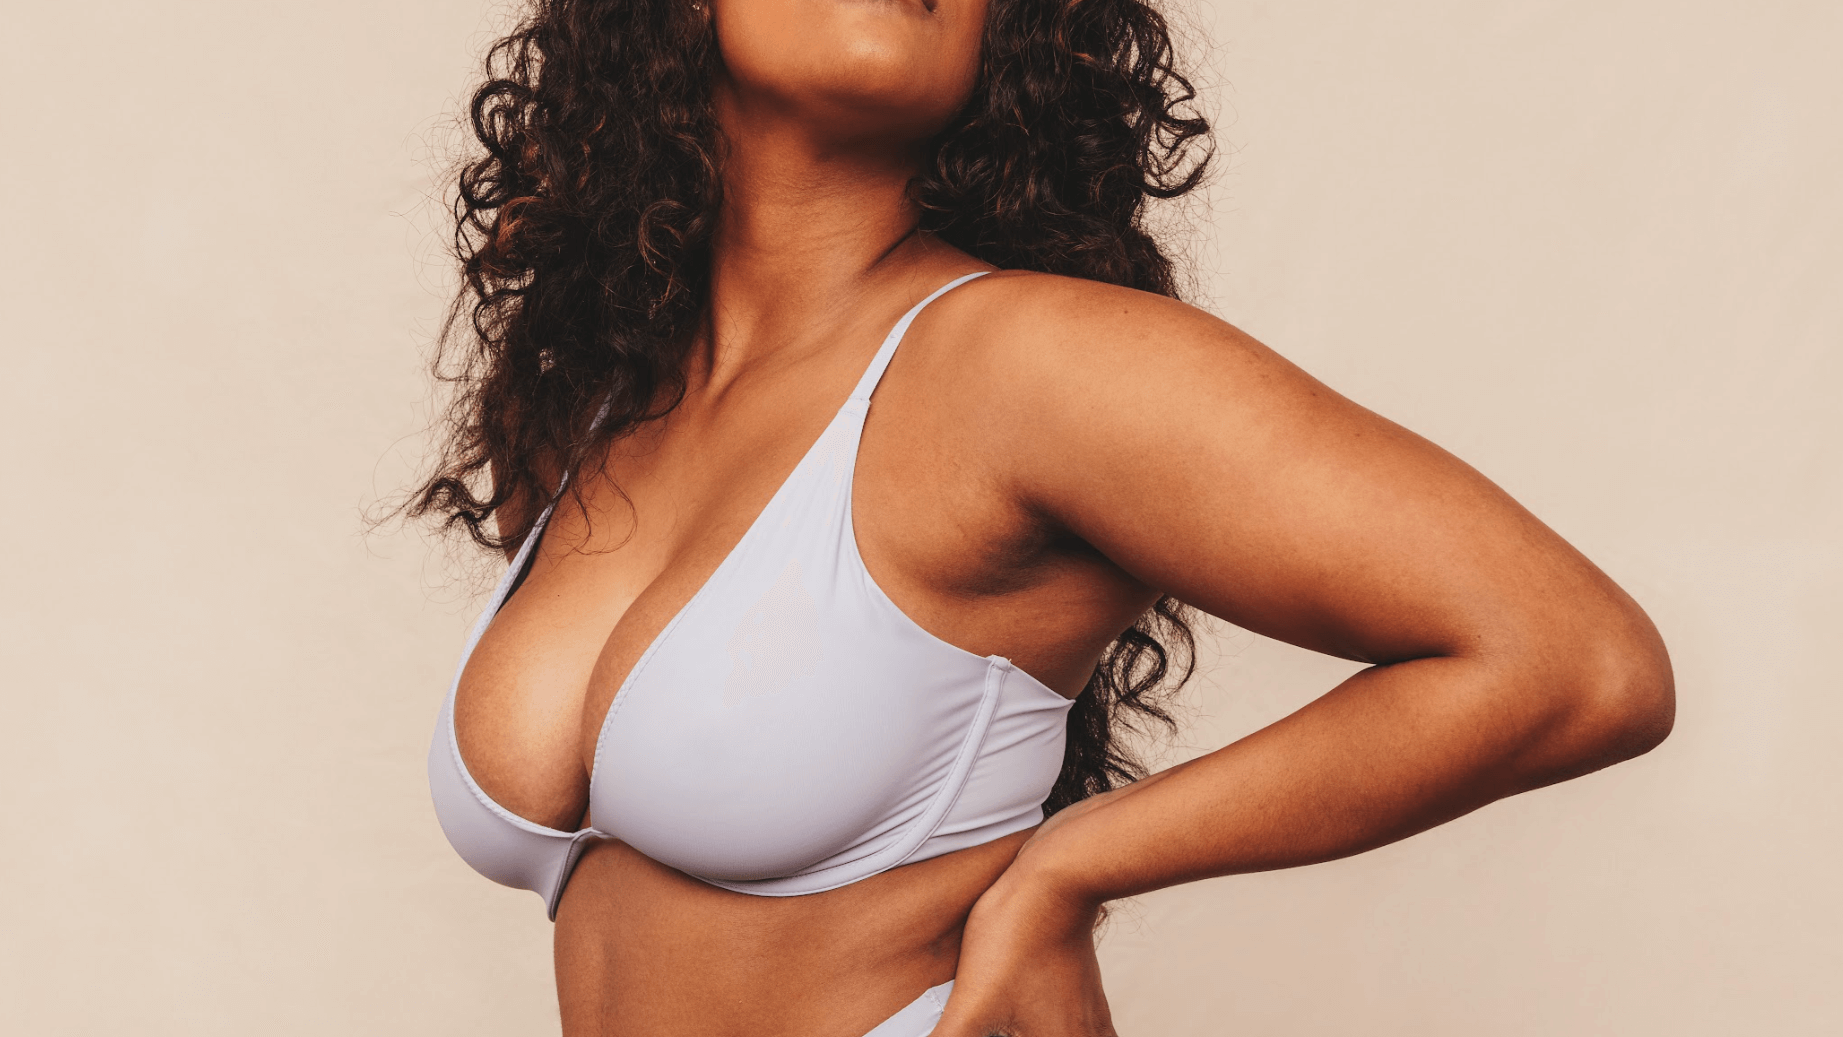 Dr. Sarah Mess - Fat transfer creates beautiful breasts that look and feel  natural. So if you don't want implants but wish your small B cup was a full  C cup, fat